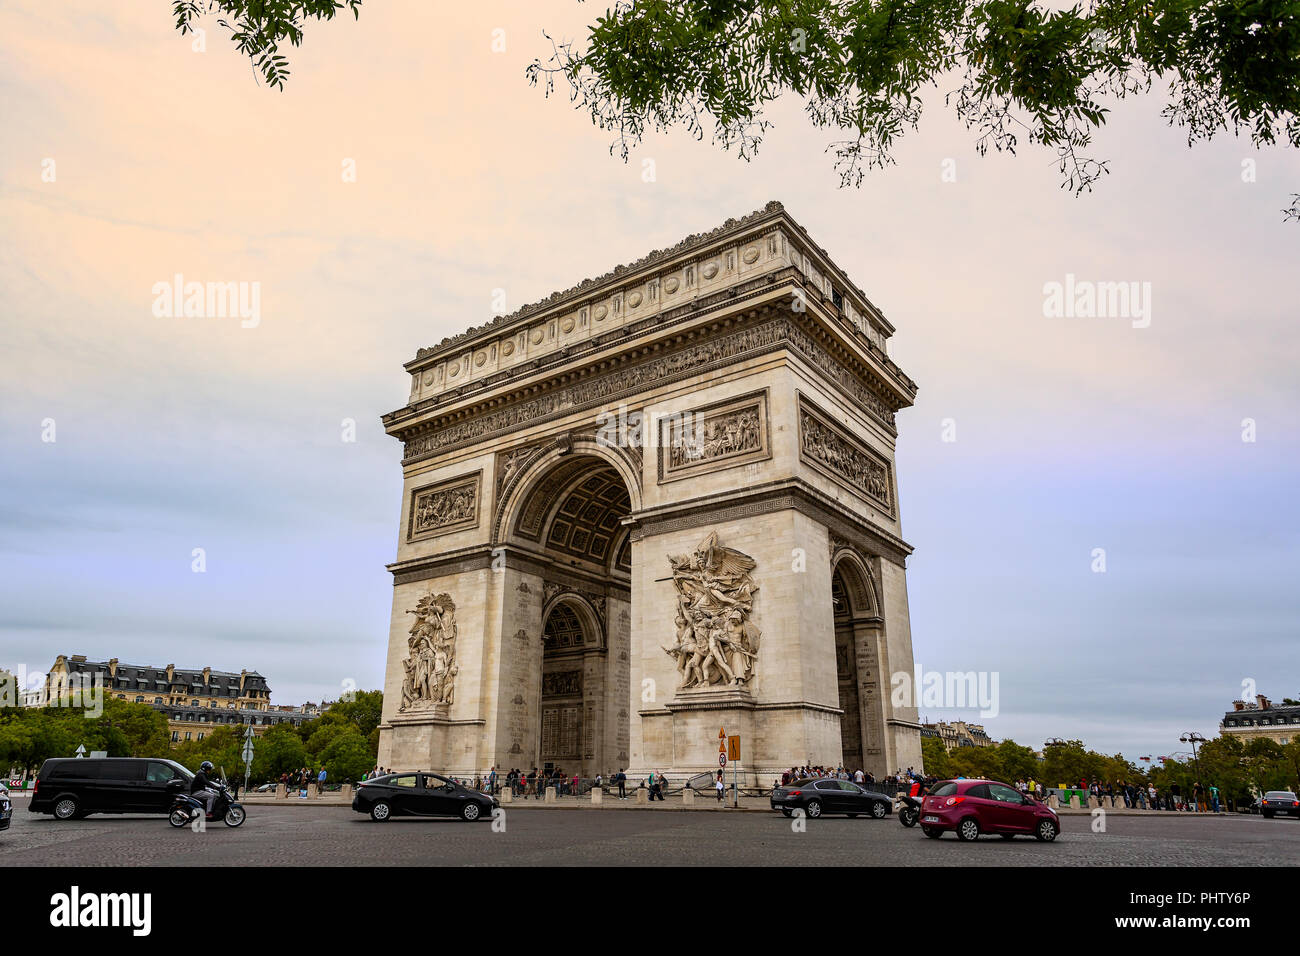 View of the Arc de Triomphe from the Champs Elysees in Paris, France on 26 August 2018 Stock Photo